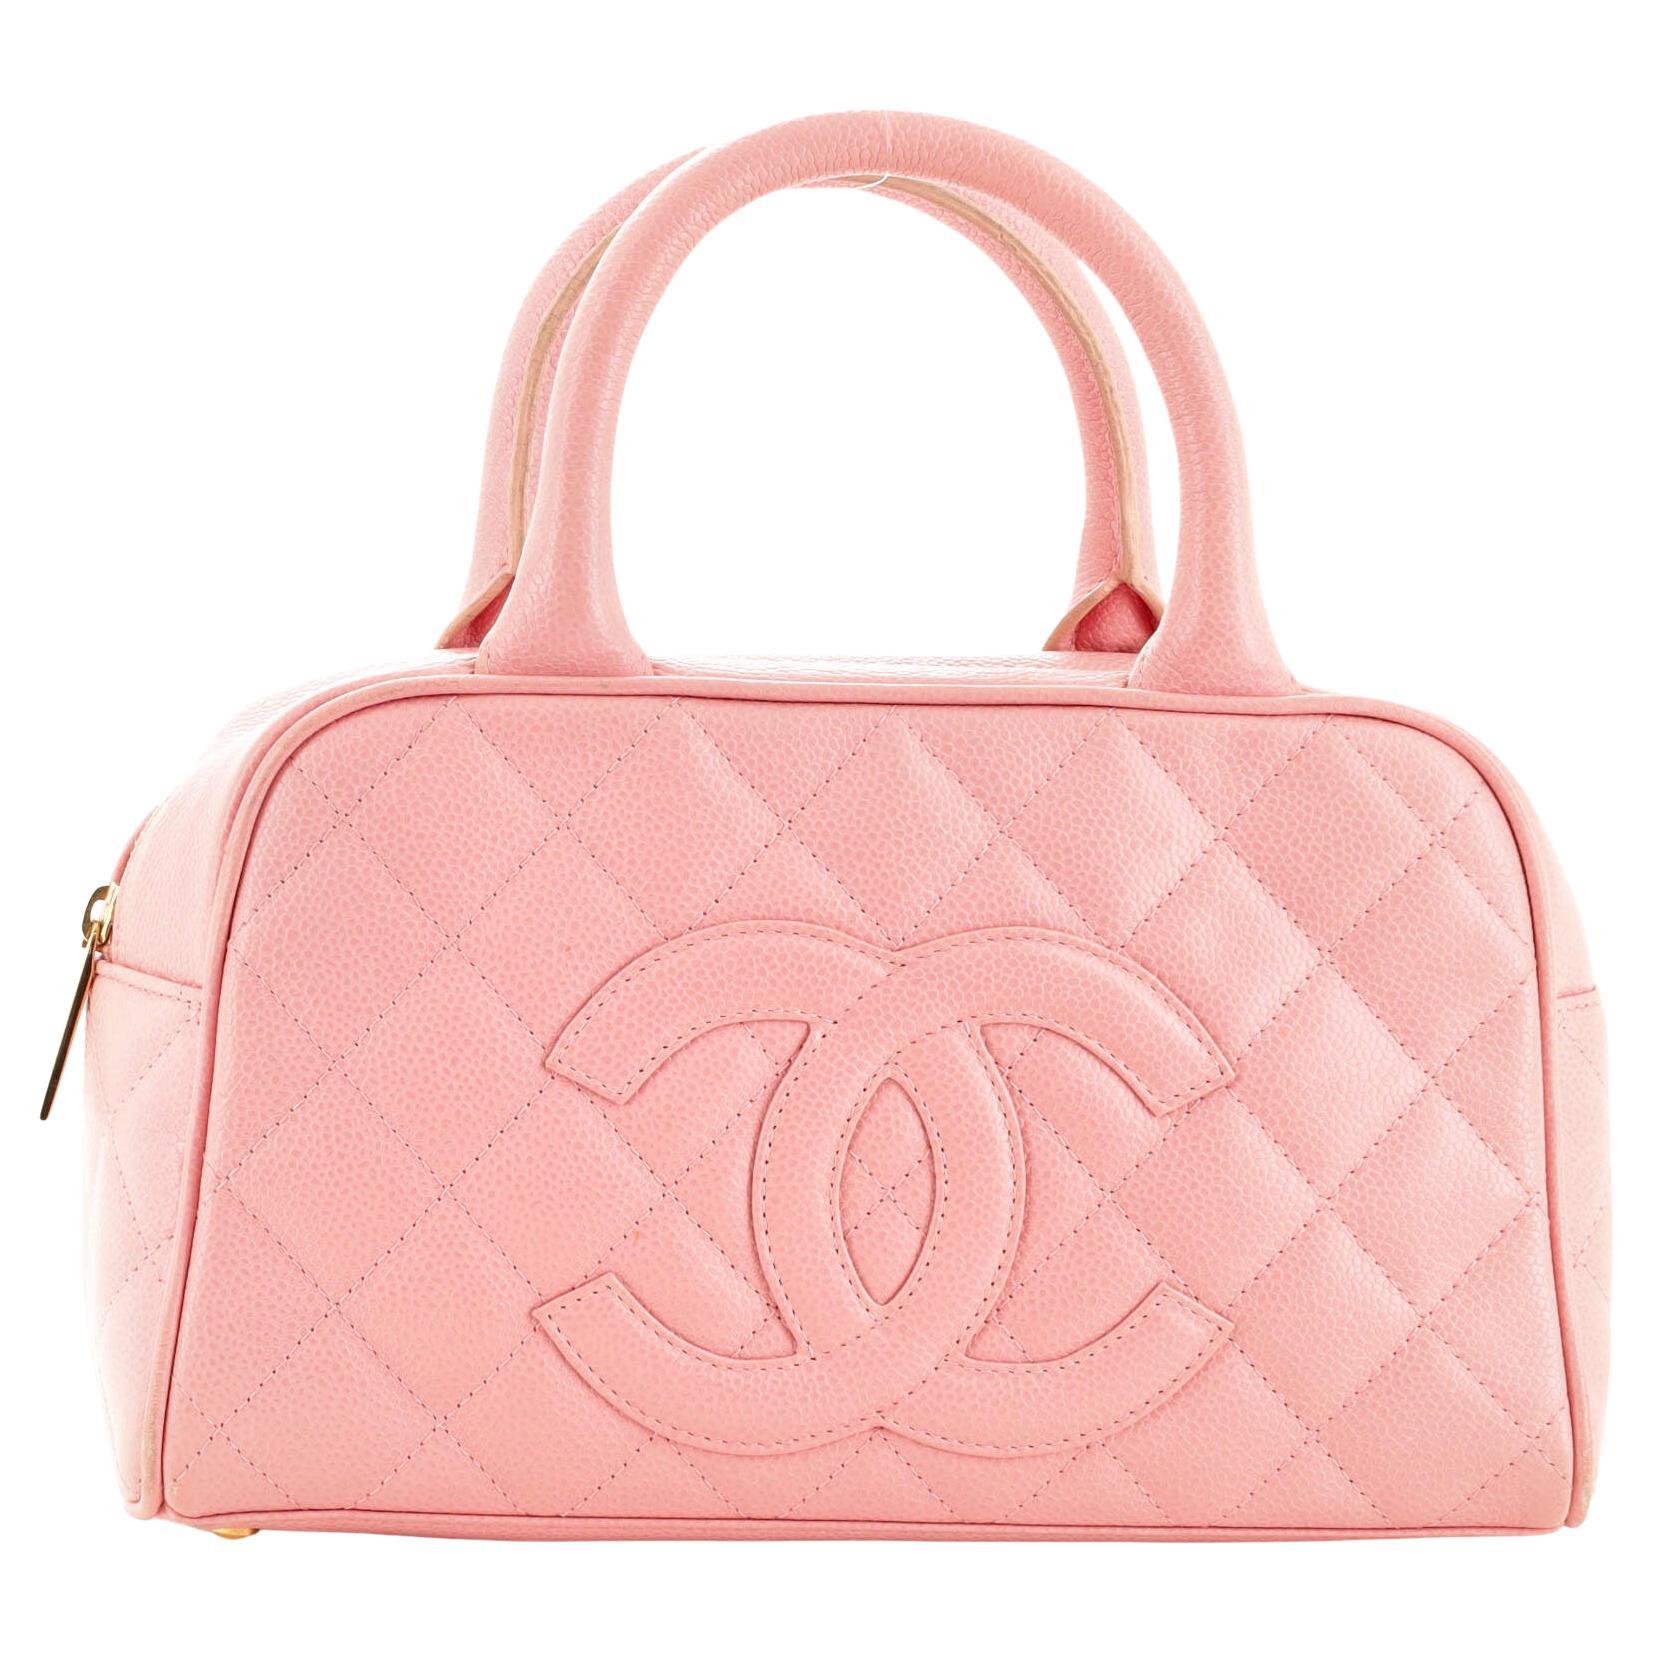 Bowling bag leather handbag Chanel Pink in Leather - 26765509